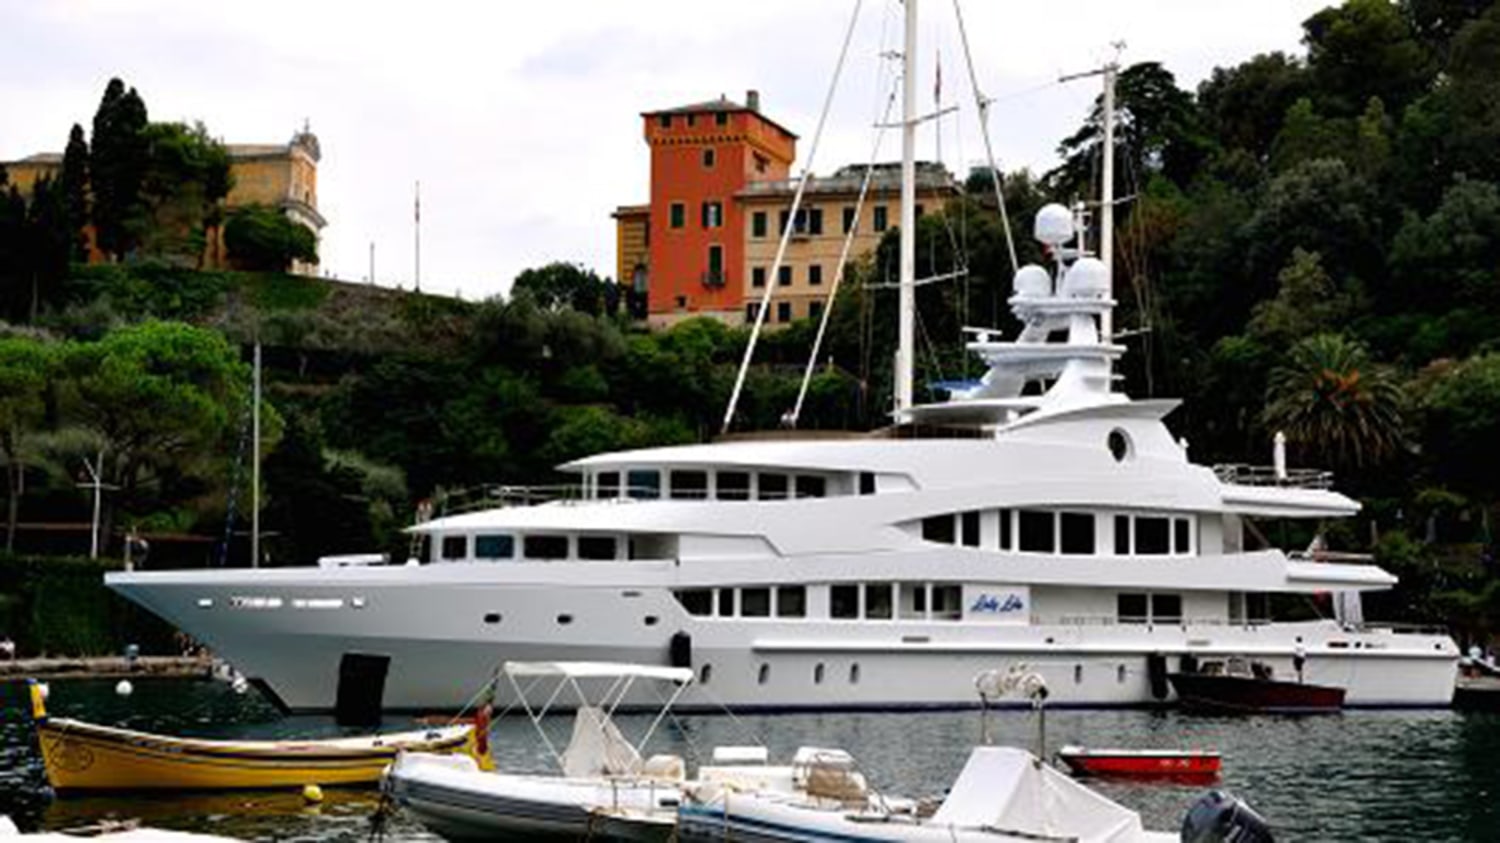 Superyacht Lady Lola sold by Merle Wood and Fraser Yachts